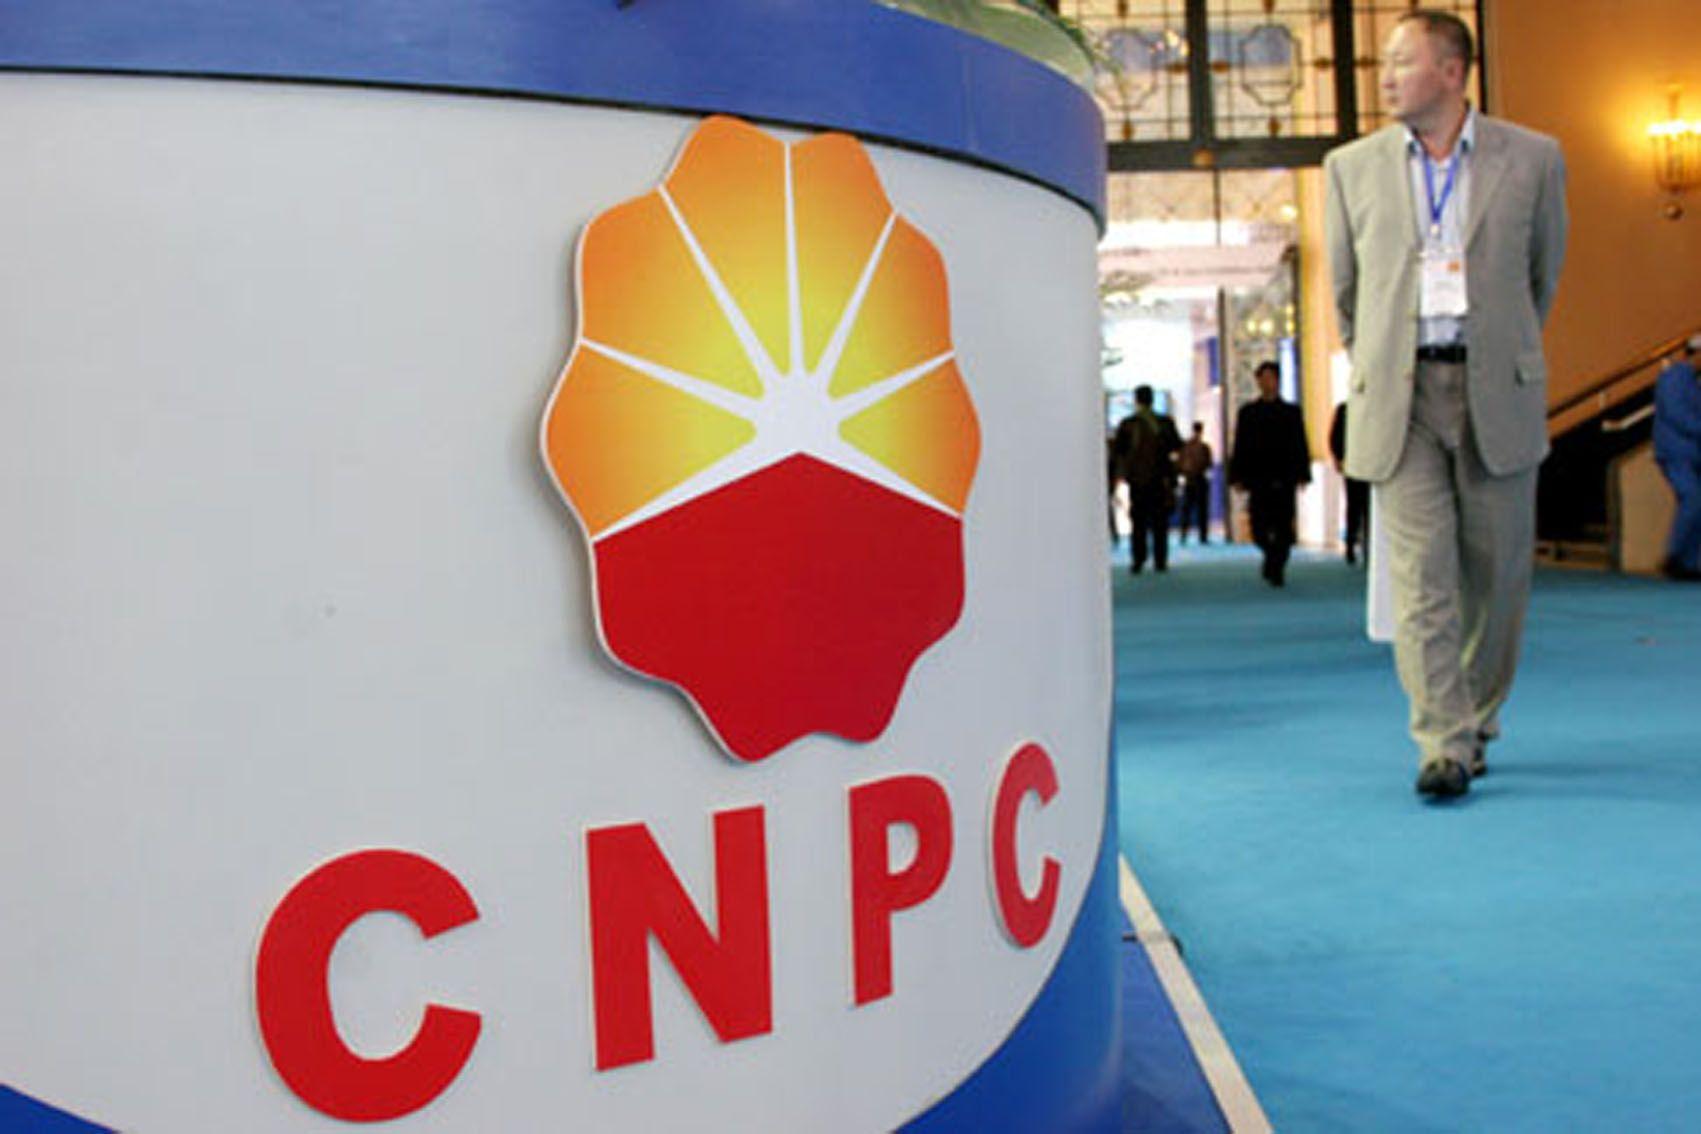 CNPC Logo - China CNPC sees to invest at least $2bn in Peru after Petrobras deal ...